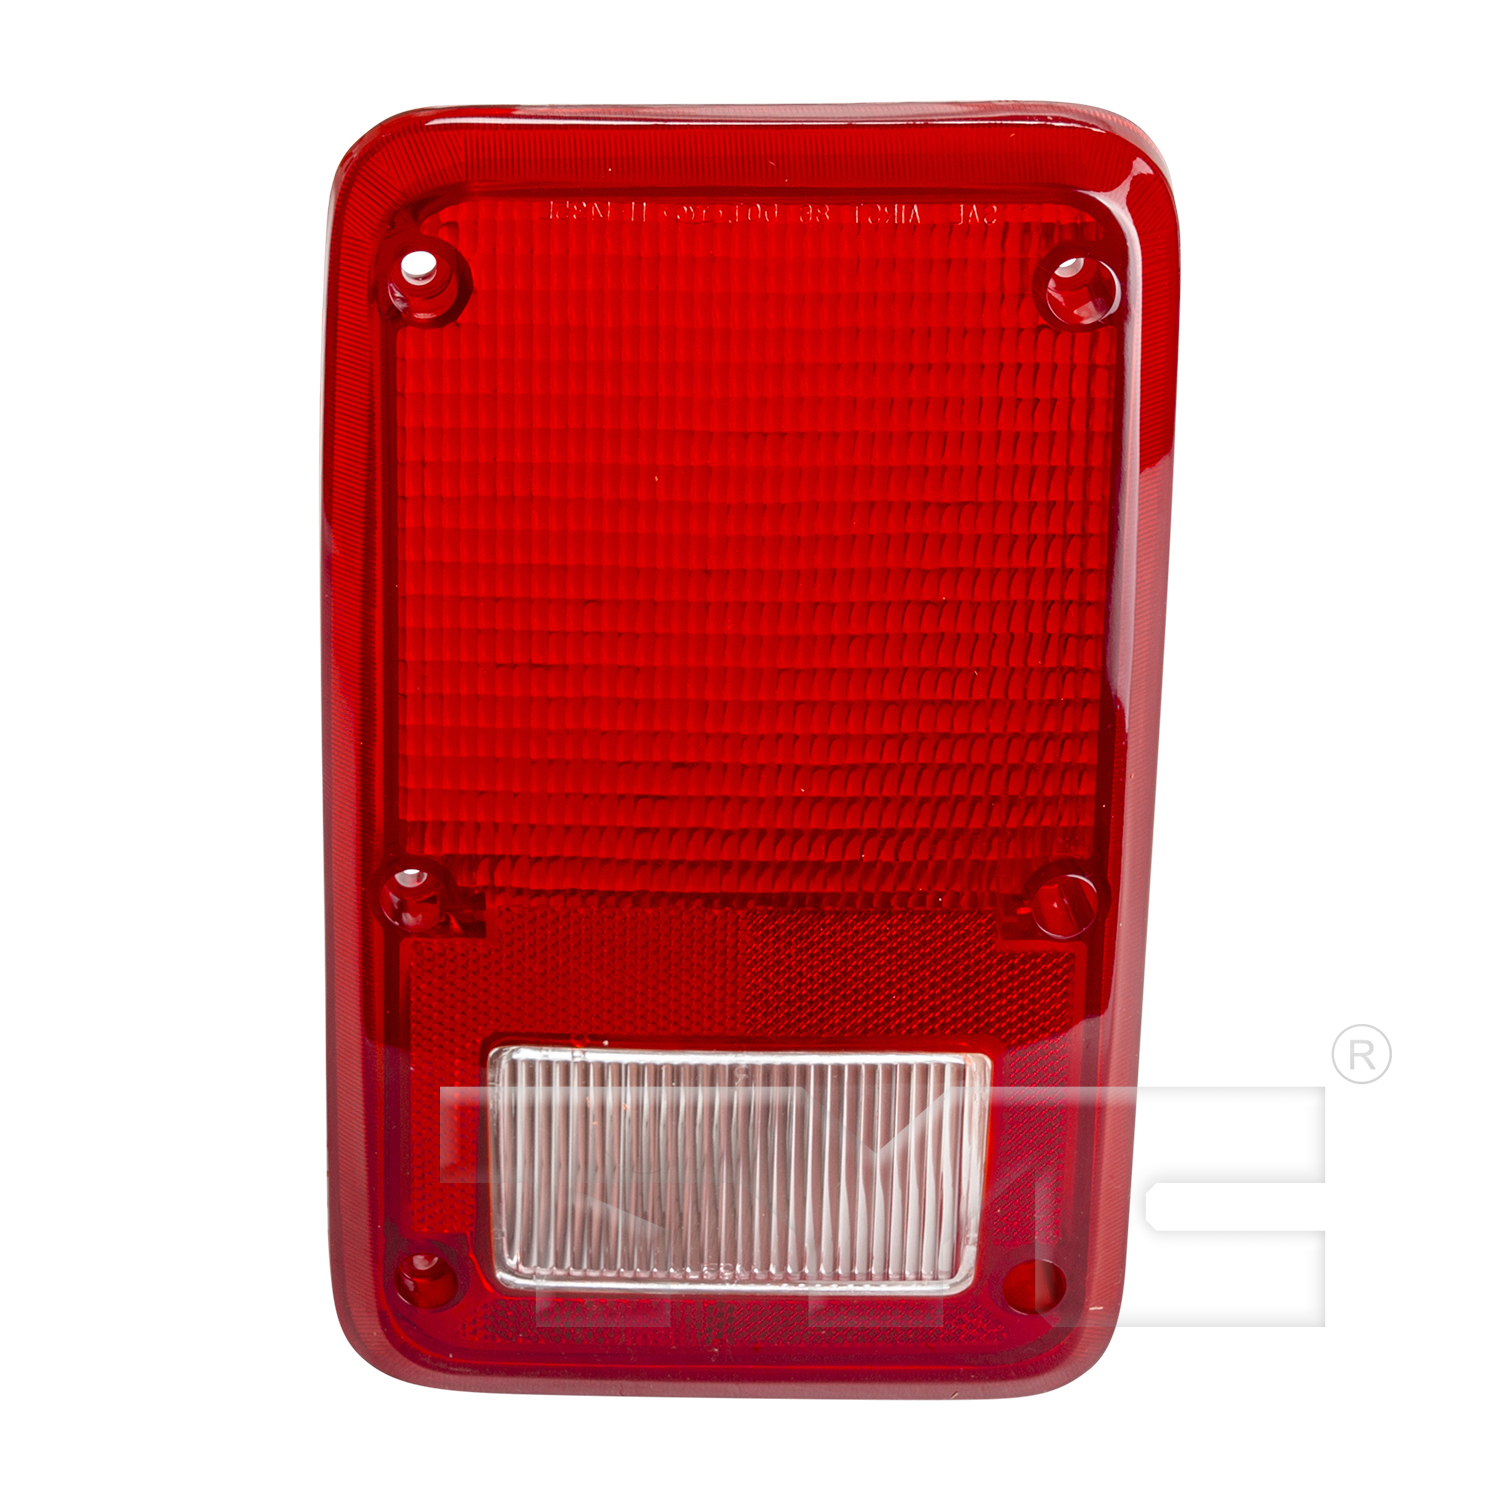 Aftermarket TAILLIGHTS for PLYMOUTH - PB100, PB100,78-80,LT Taillamp lens